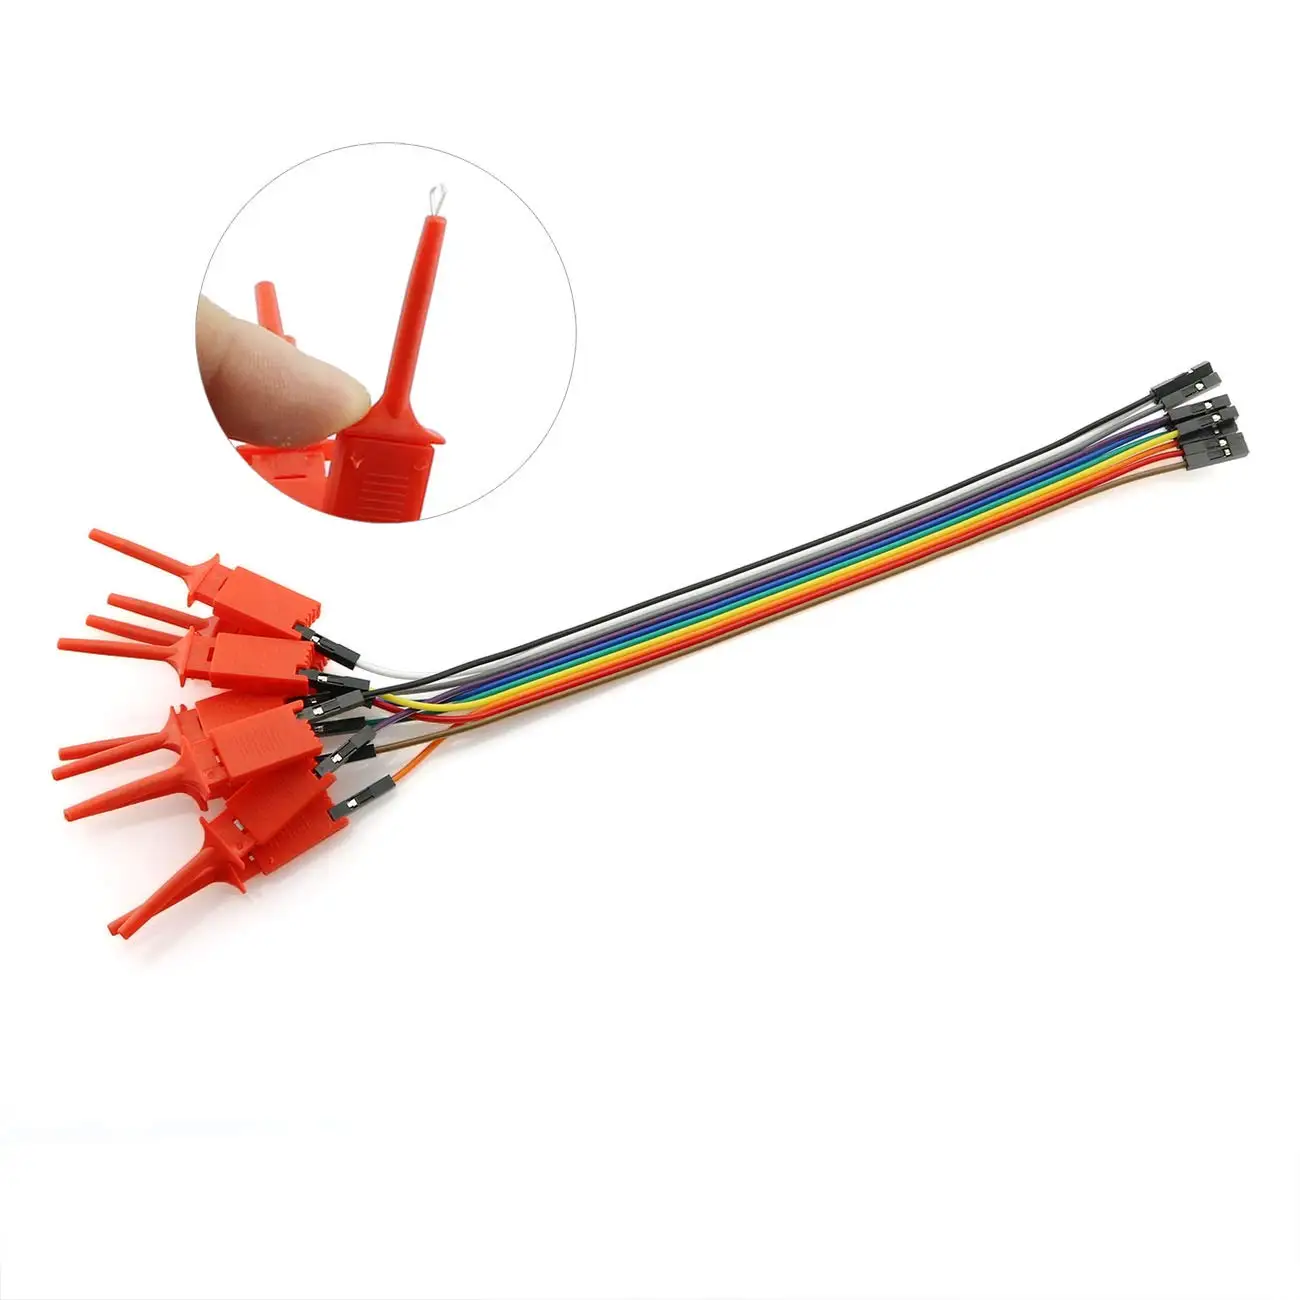 10 X Mini Test Hook Probe Spring Clip For PCB SMD IC Red 